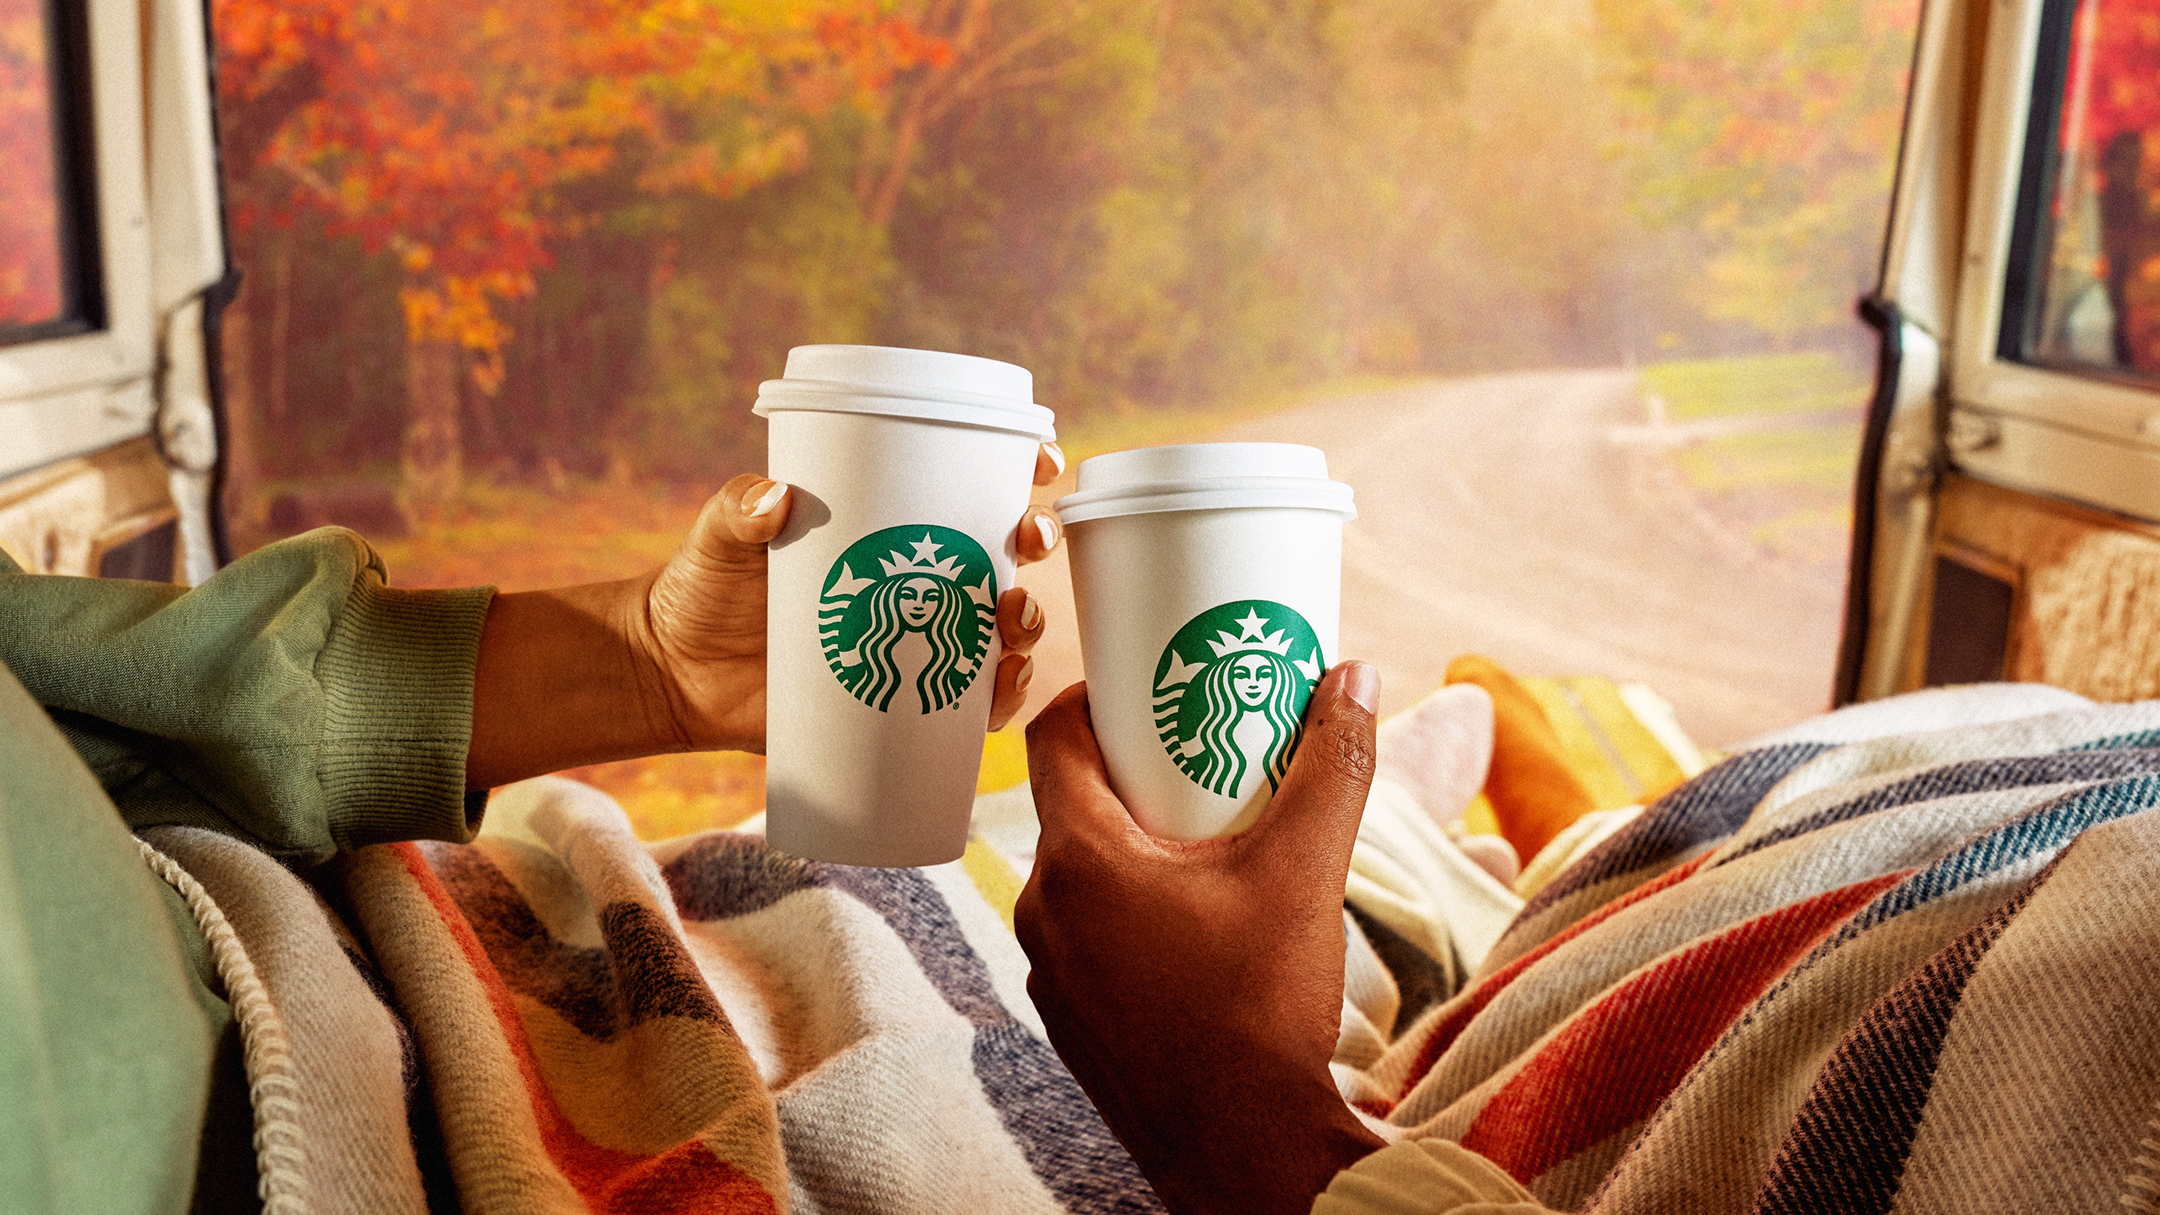 Starbucks Coffee who Pumpkin Spice together, stay together